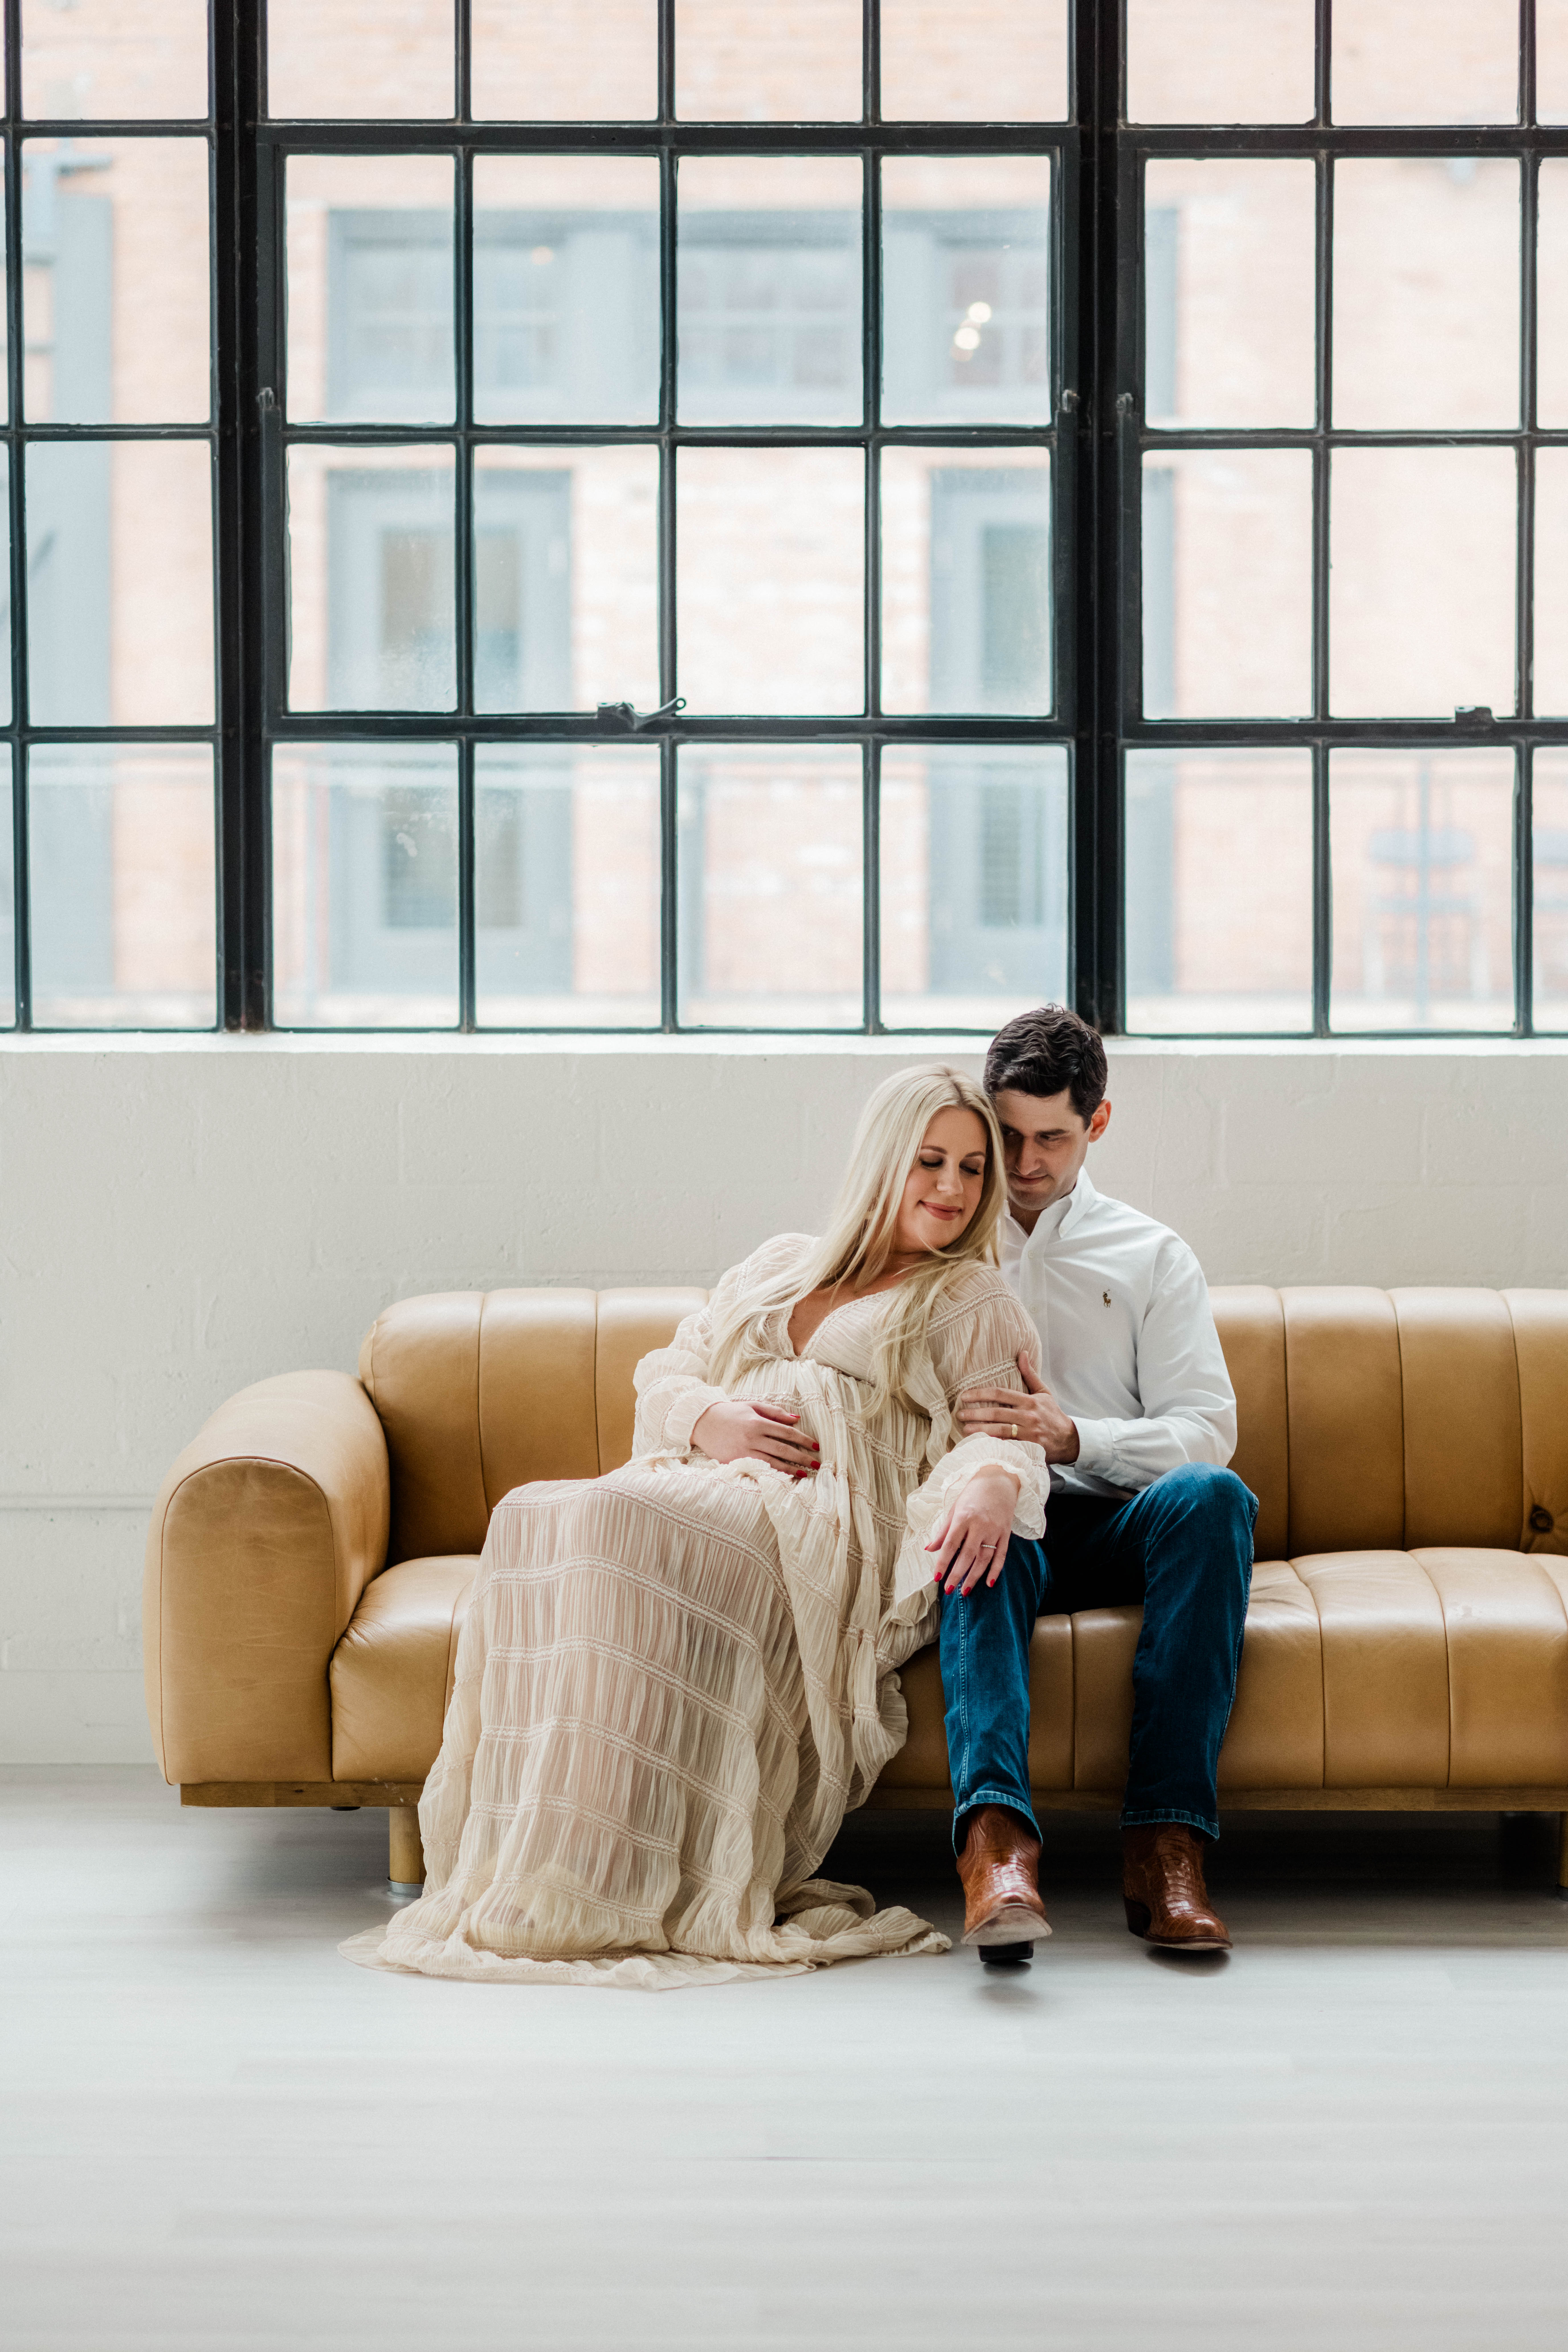 The Terry Family's Maternity Session at the Lumen Room in Houston, Texas with Rachel Driskell Photography